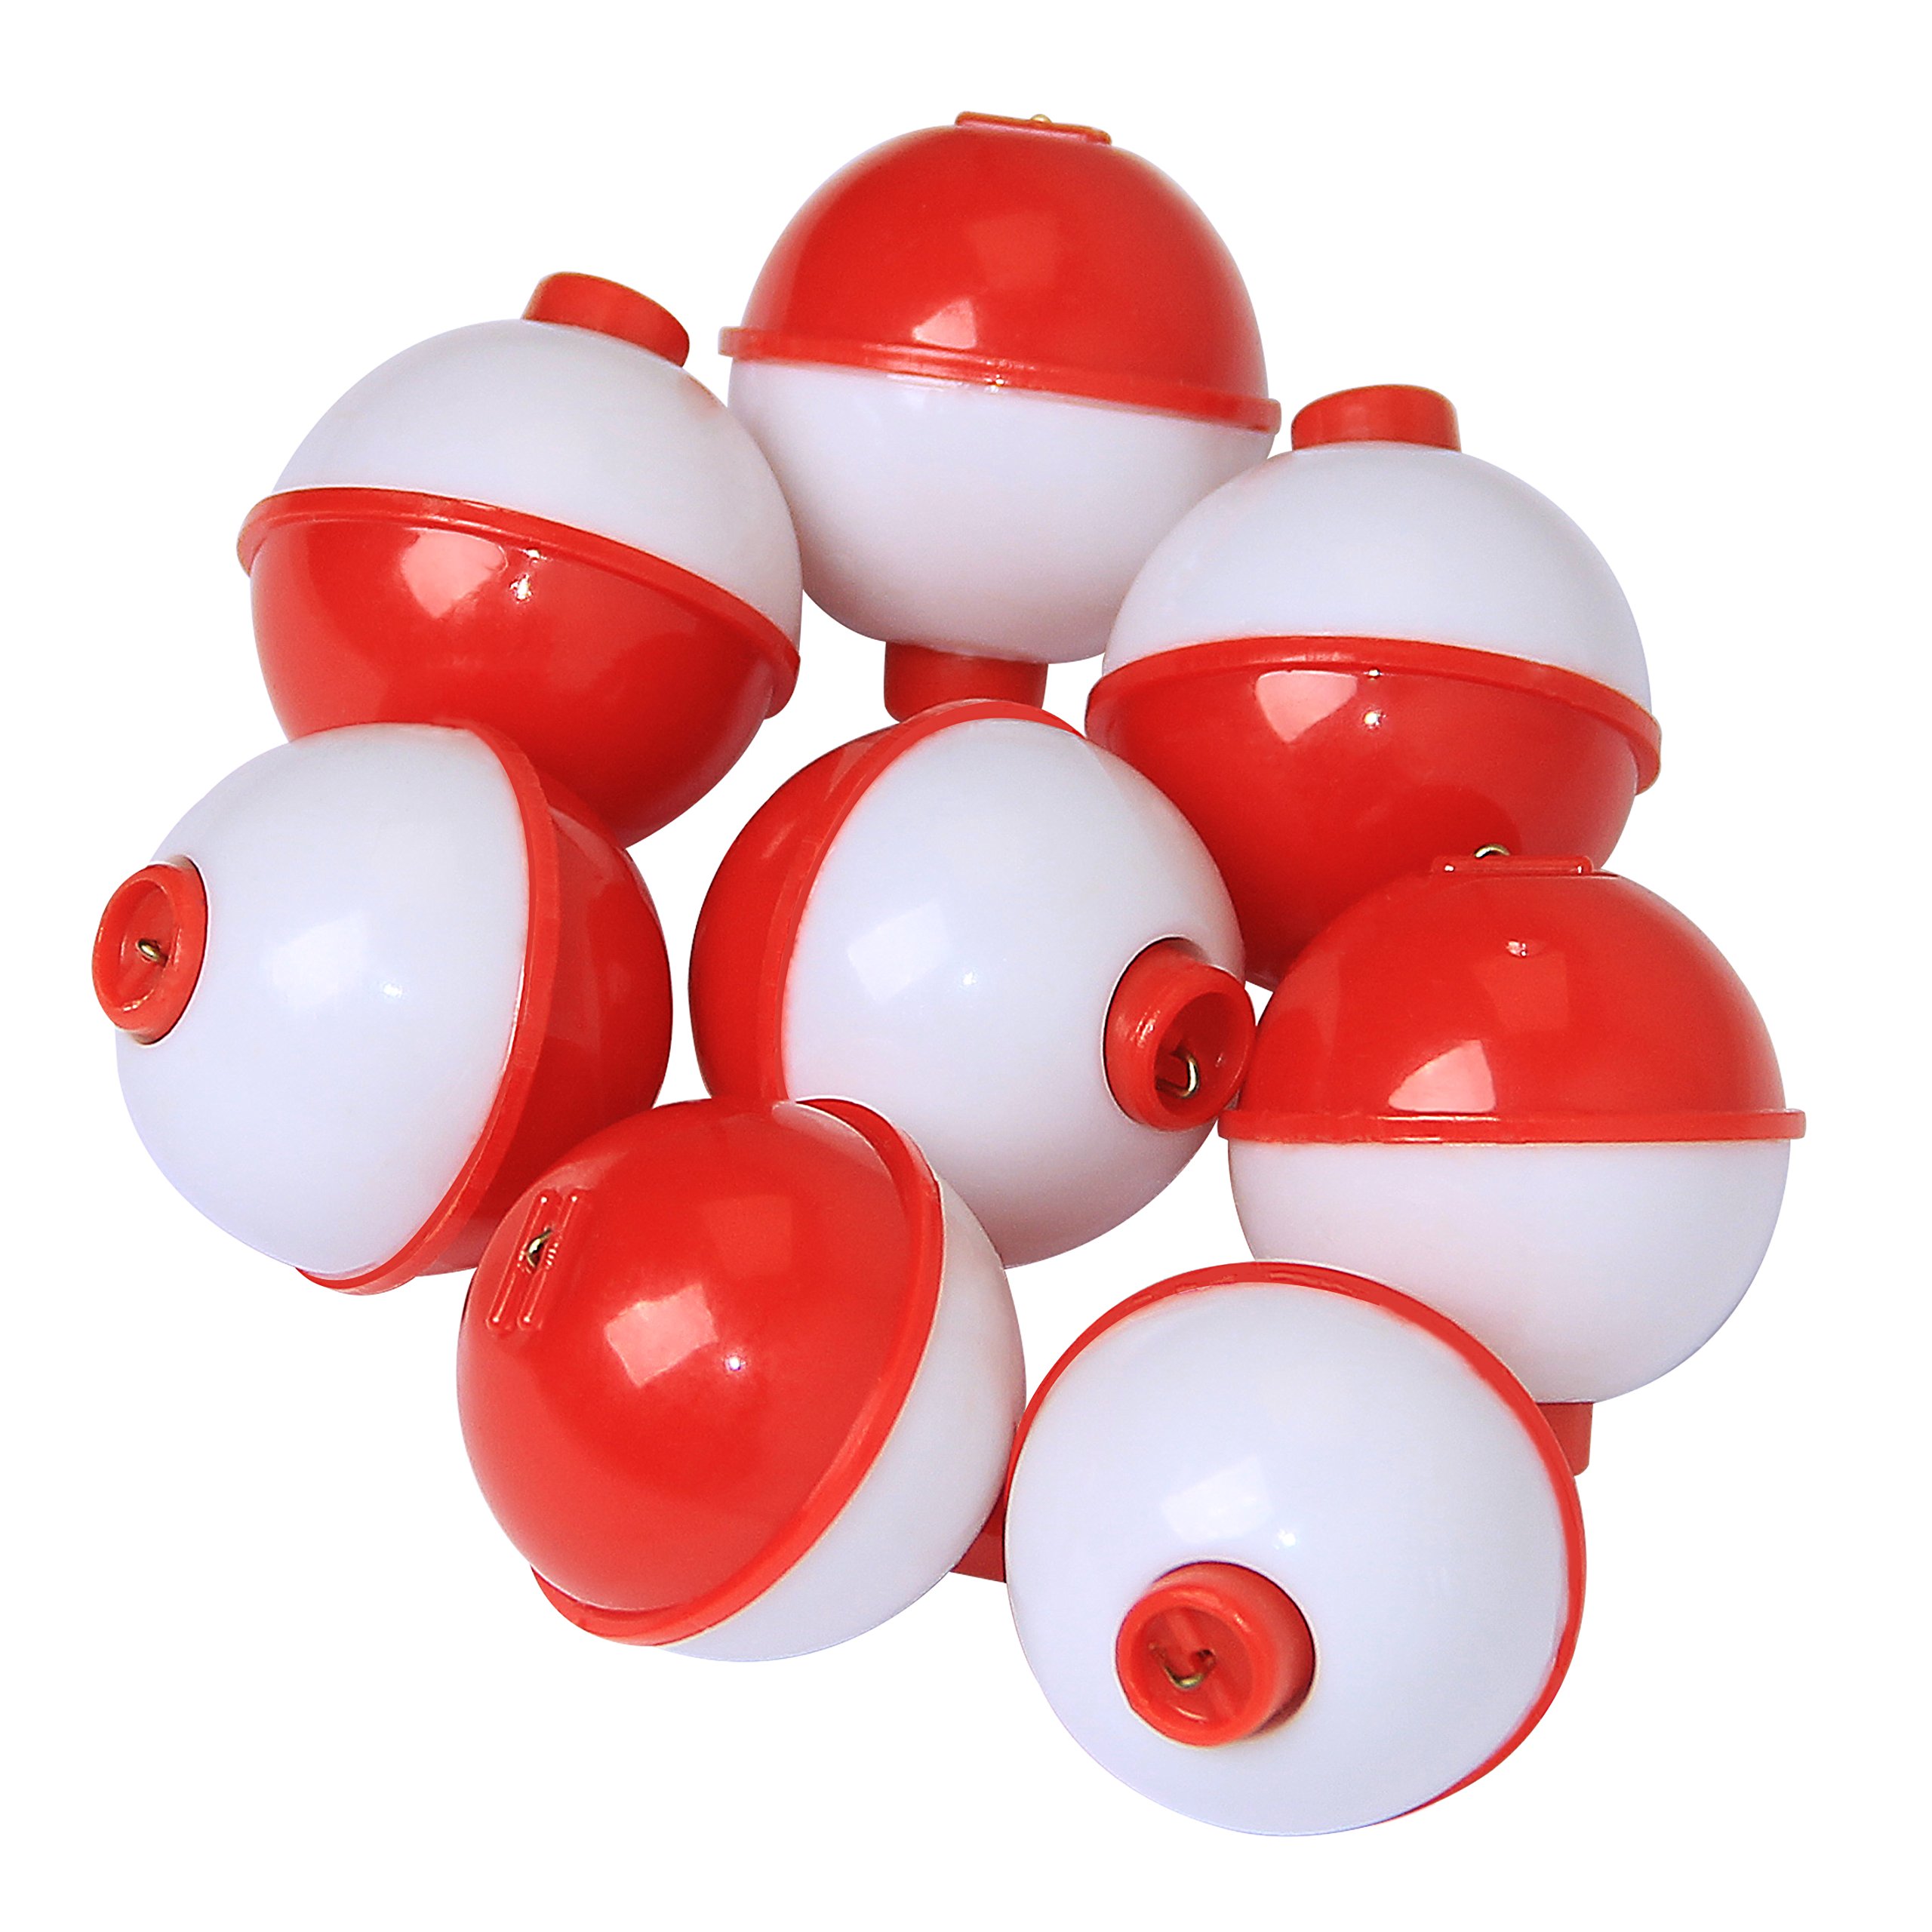 AGOOL Fishing Bobbers Set Snap Hard ABS On Red/White Fishing Floats Bobbers Push Button Round Buoy Floats Fishing Tackle Accessories Size: 0.5/0.75/1/1.25